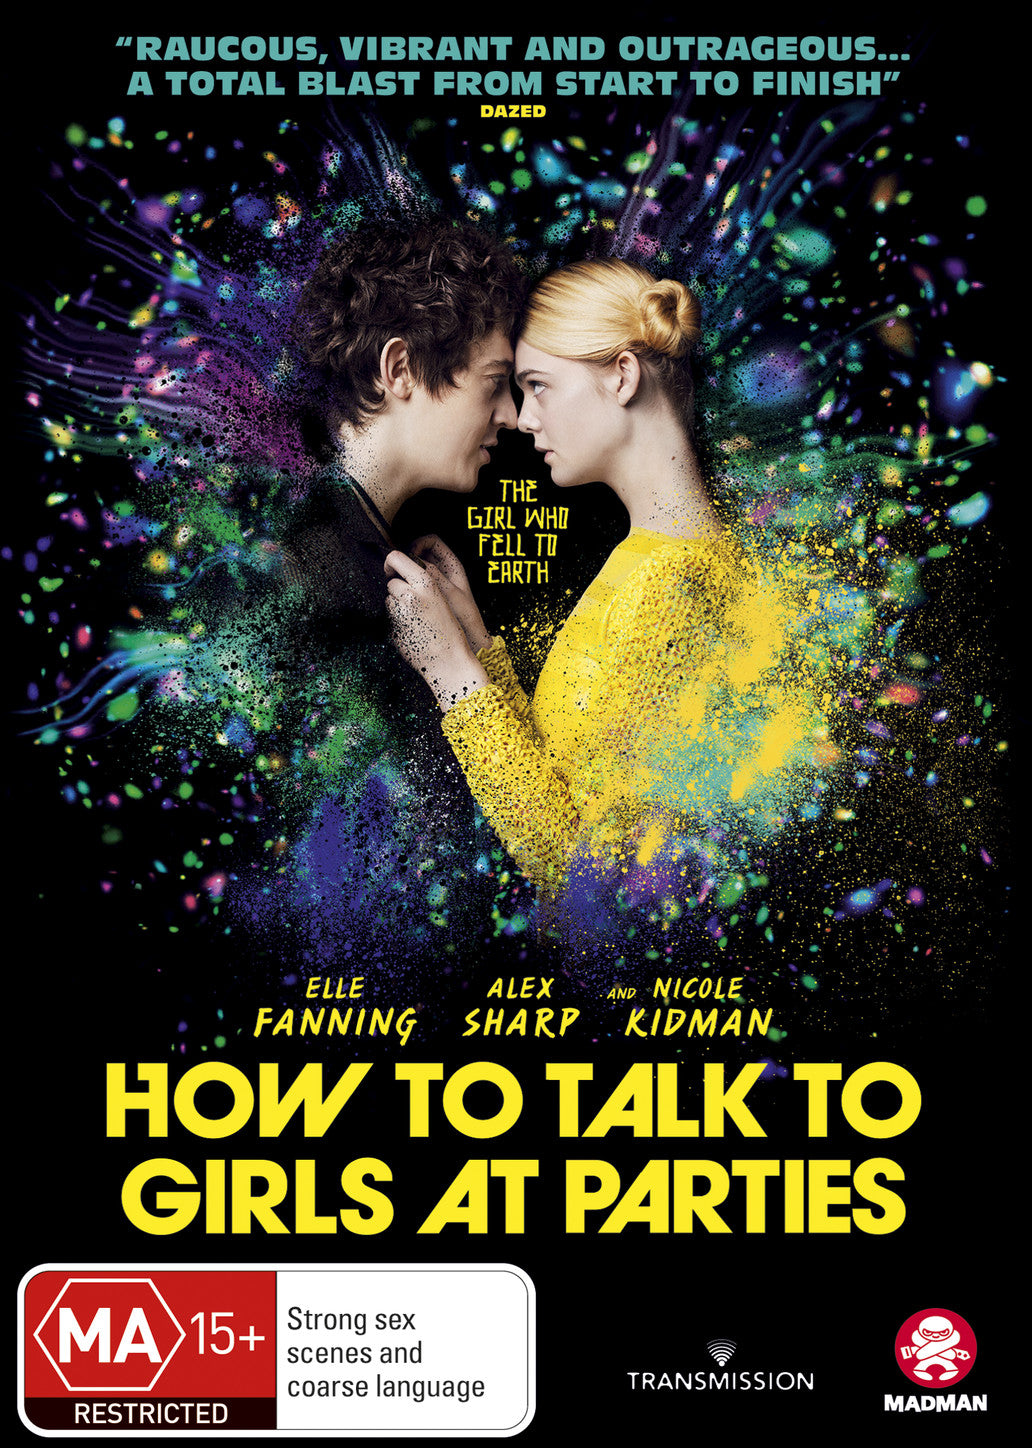 HOW TO TALK TO GIRLS AT PARTIES